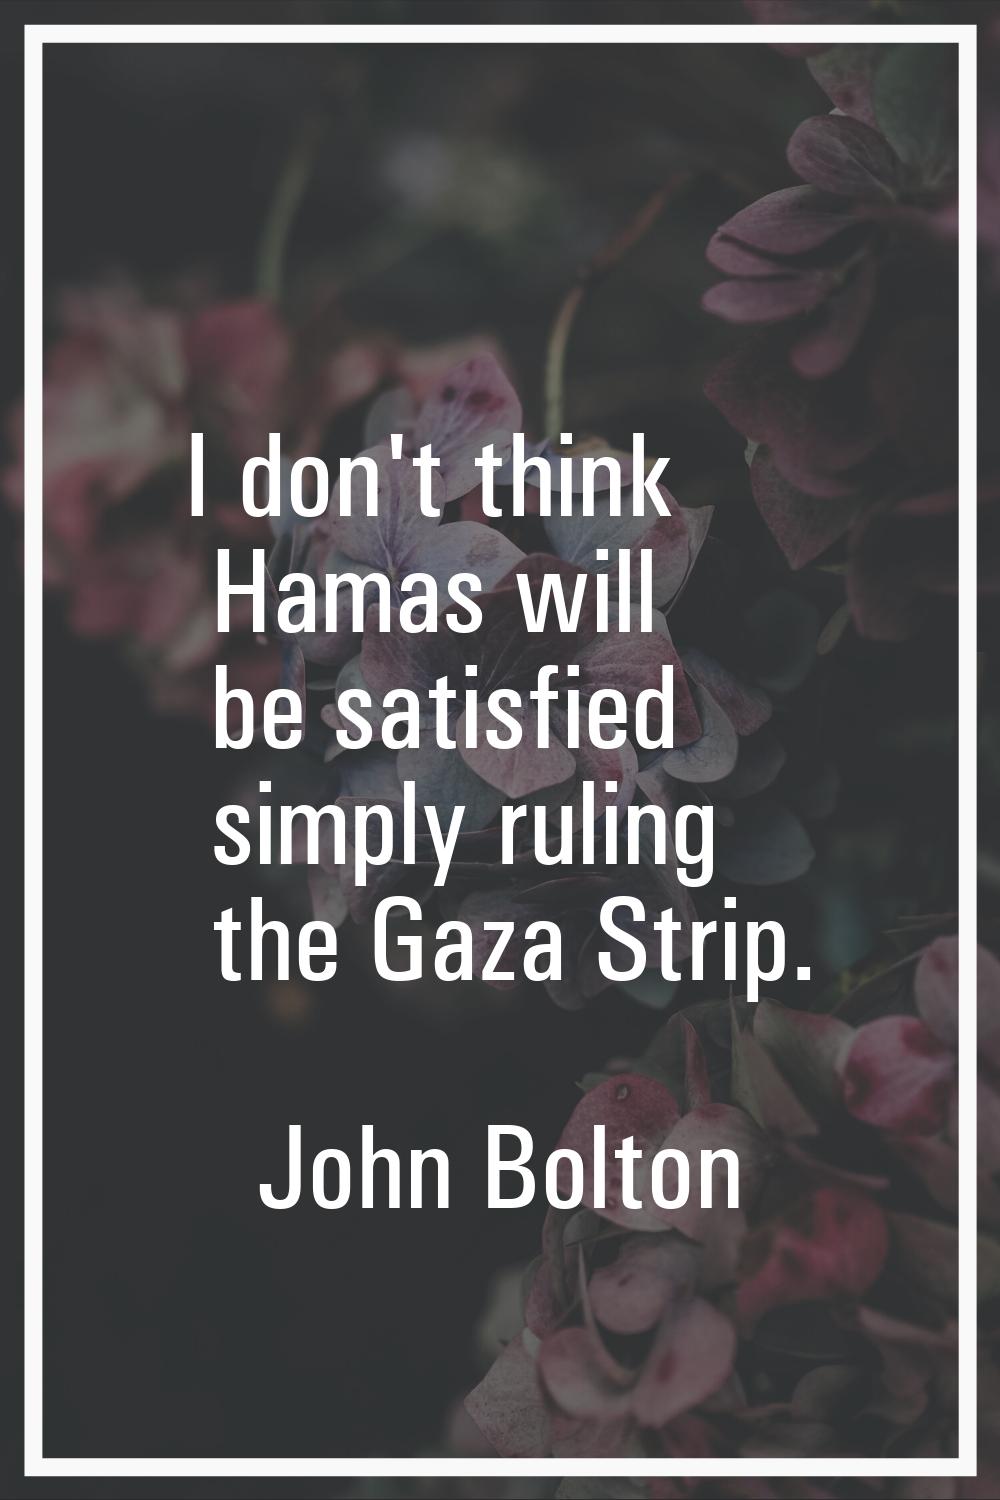 I don't think Hamas will be satisfied simply ruling the Gaza Strip.